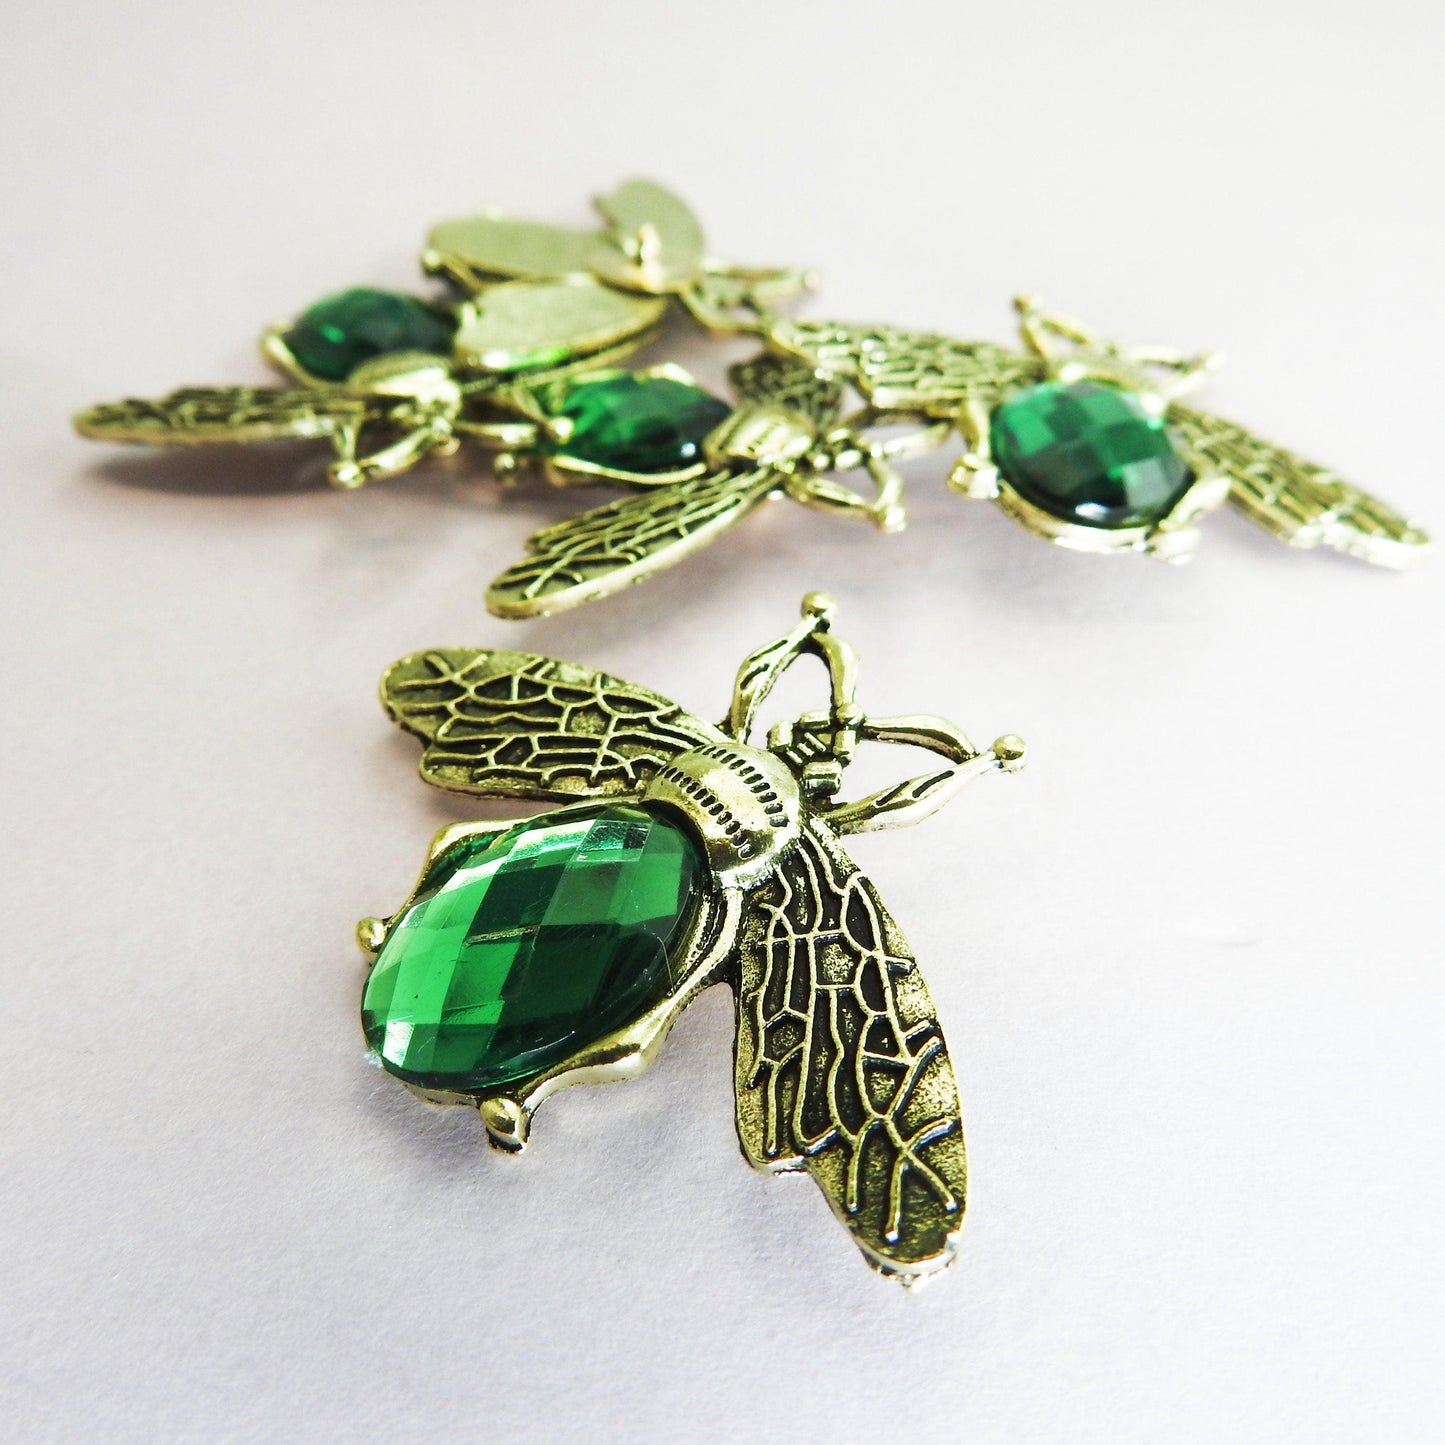 Large green rhinestone bee buttons